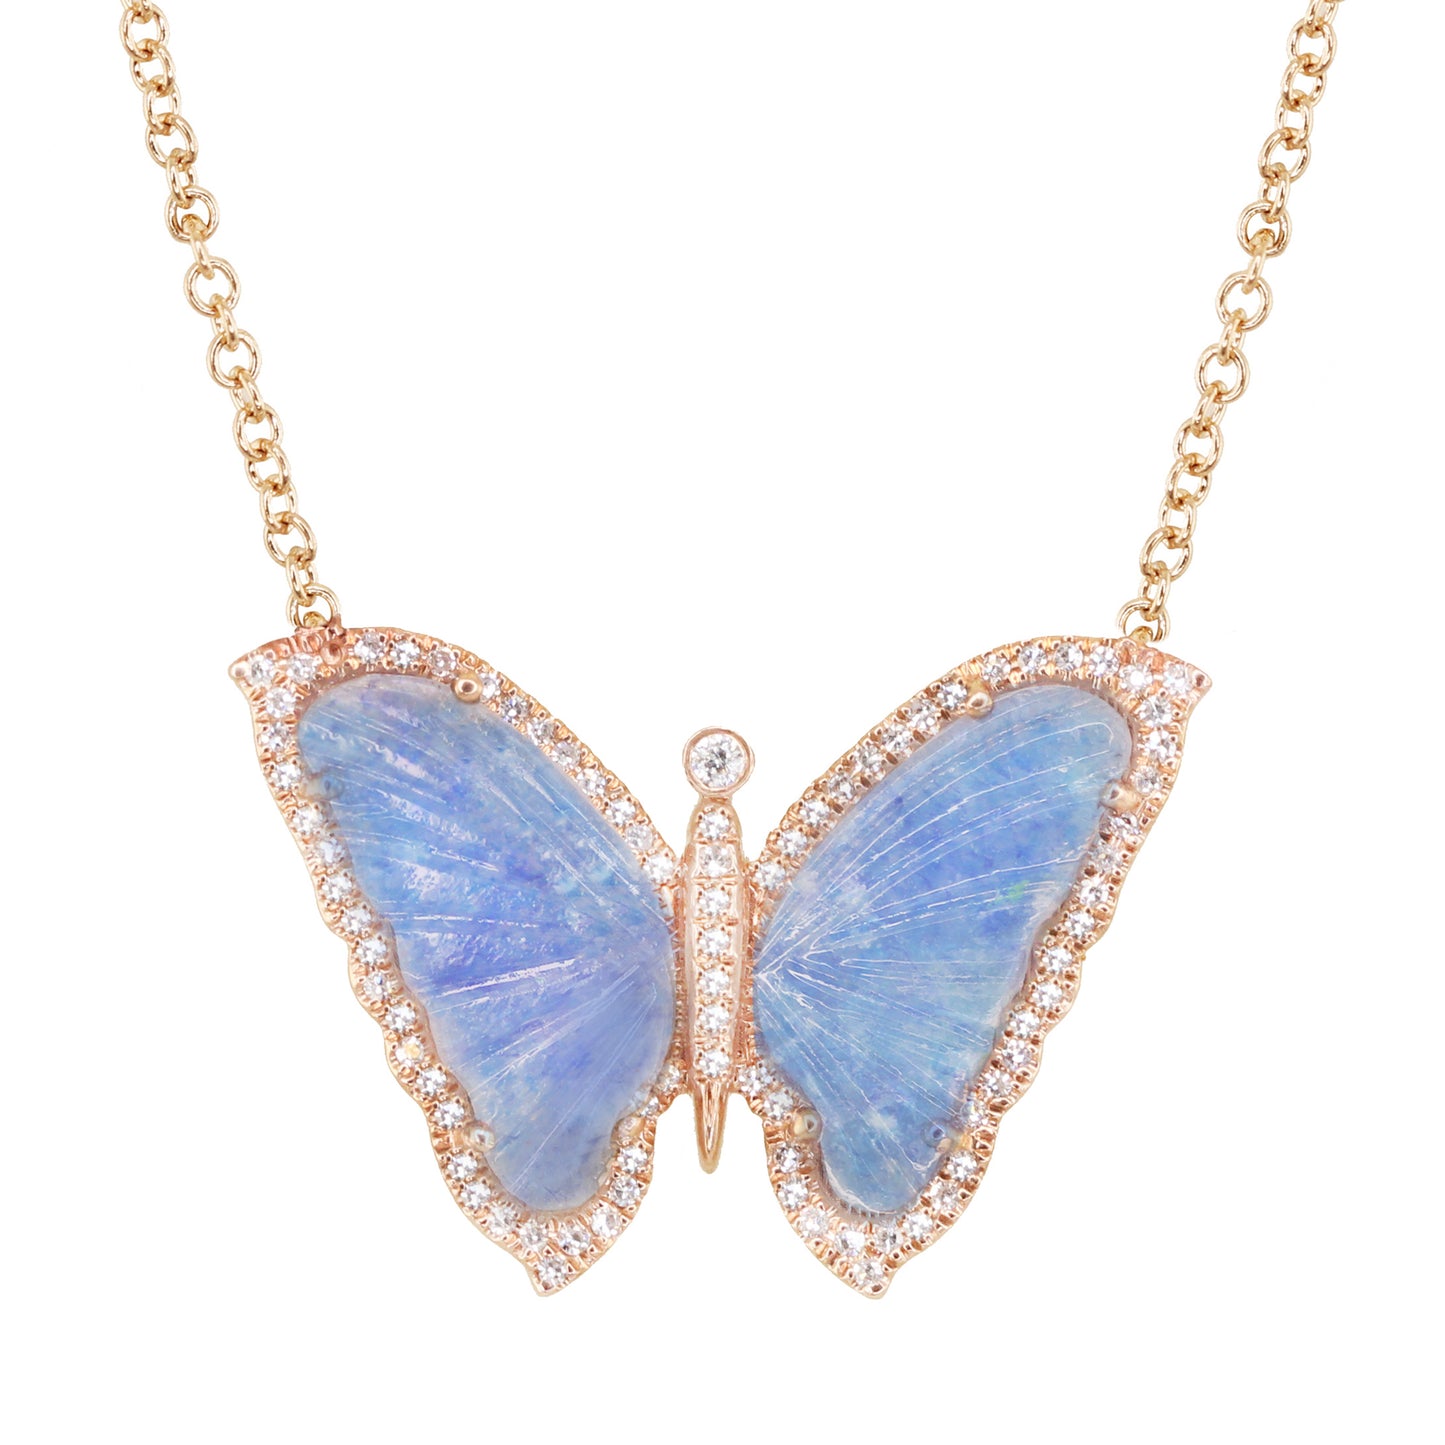 14kt gold and diamond paraiba tourmaline baby butterfly necklace